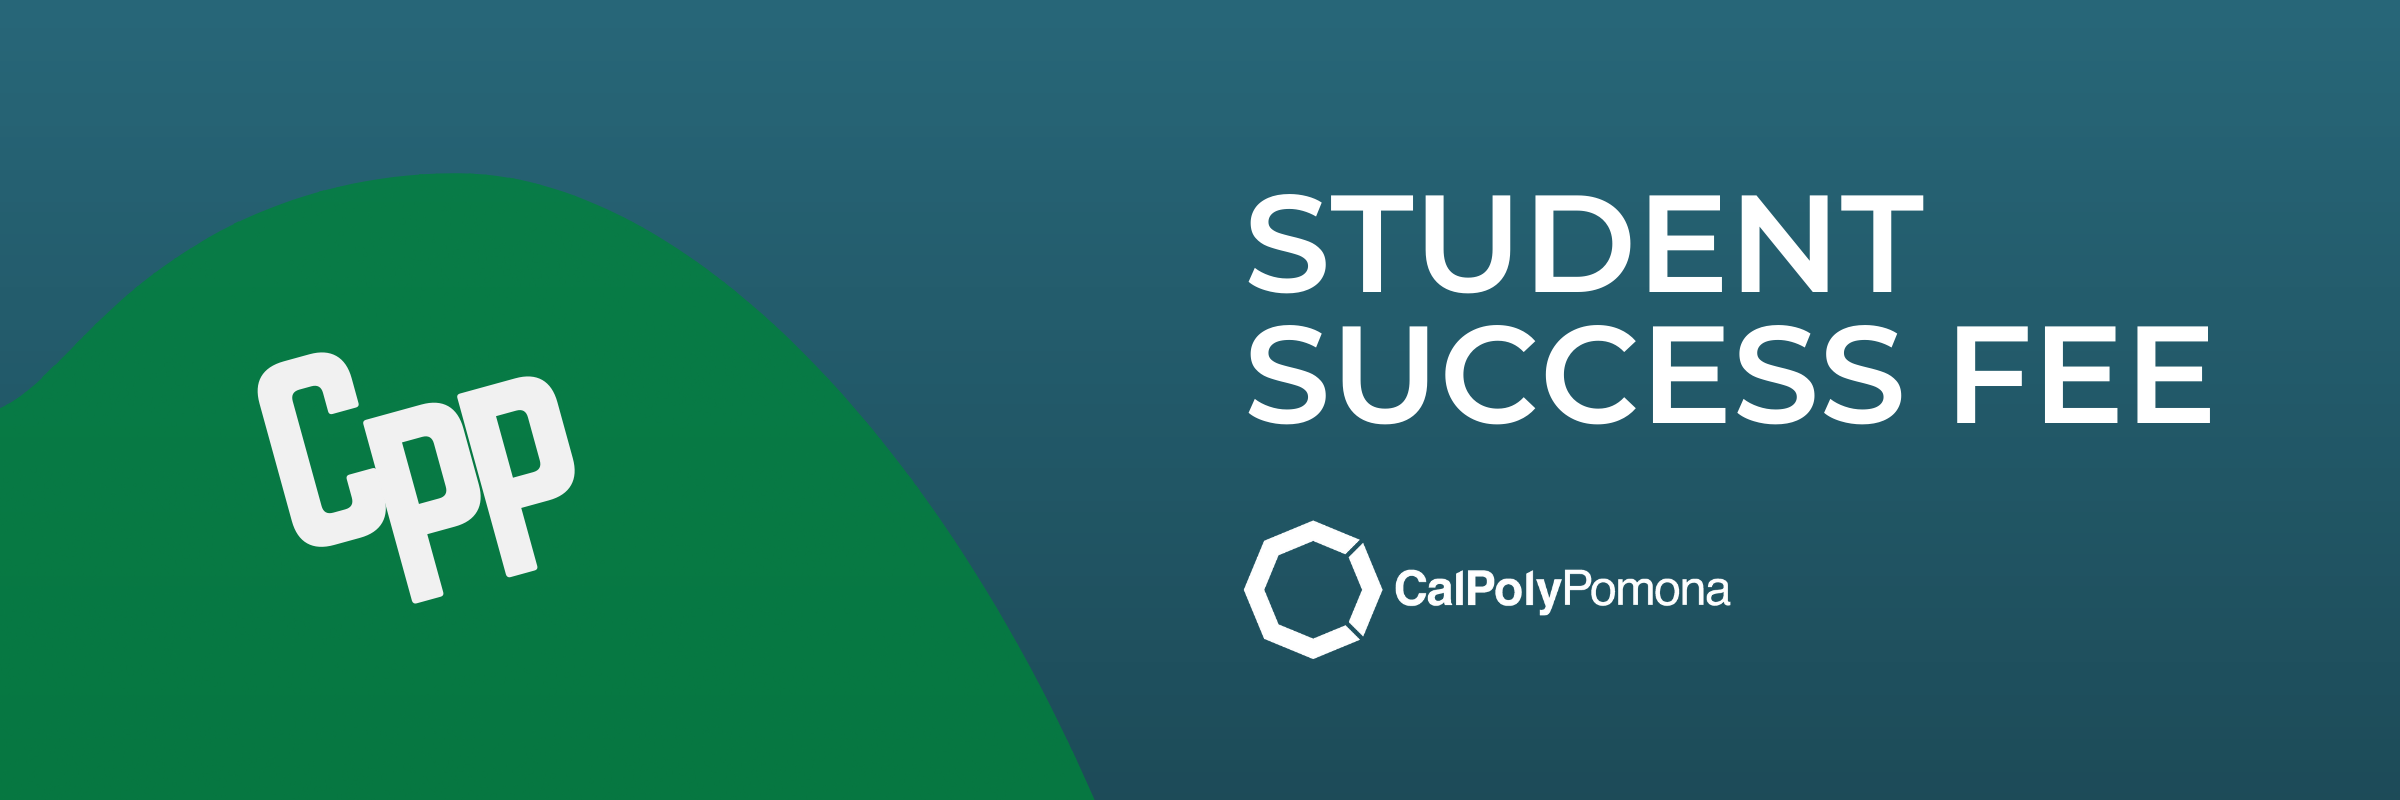 CPP letters on the hill with Student Success Fee text and CPP logo